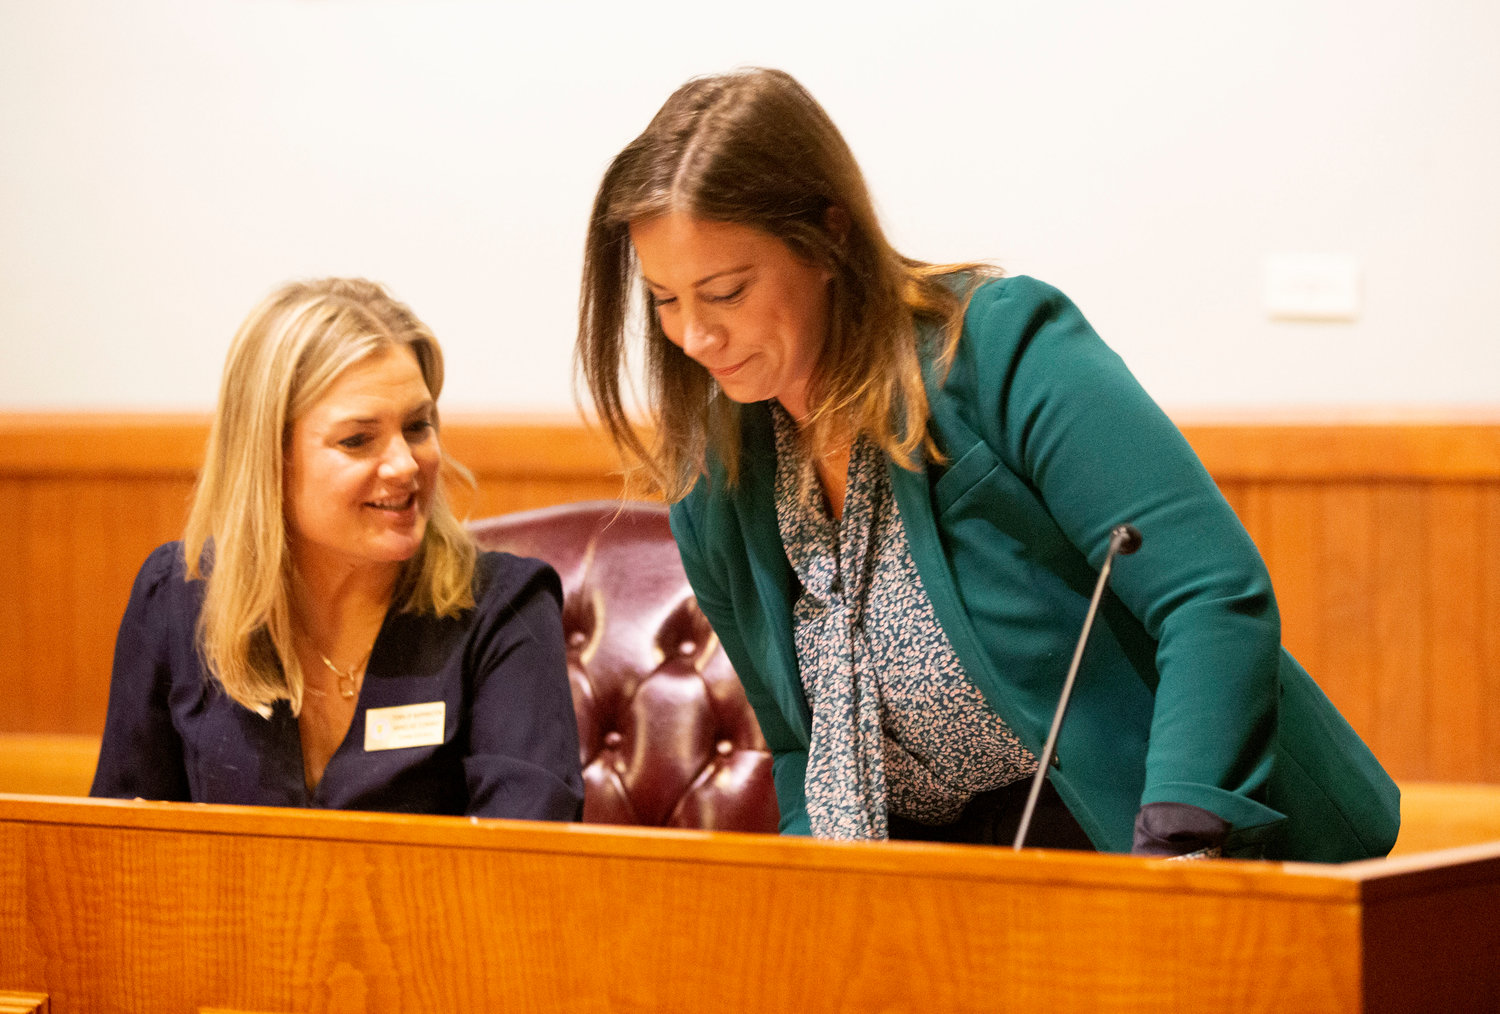 Town council member Annelise Conway (left) speaks with new council member Kate Berard during a swearing-in ceremony on Monday night, Dec. 5.